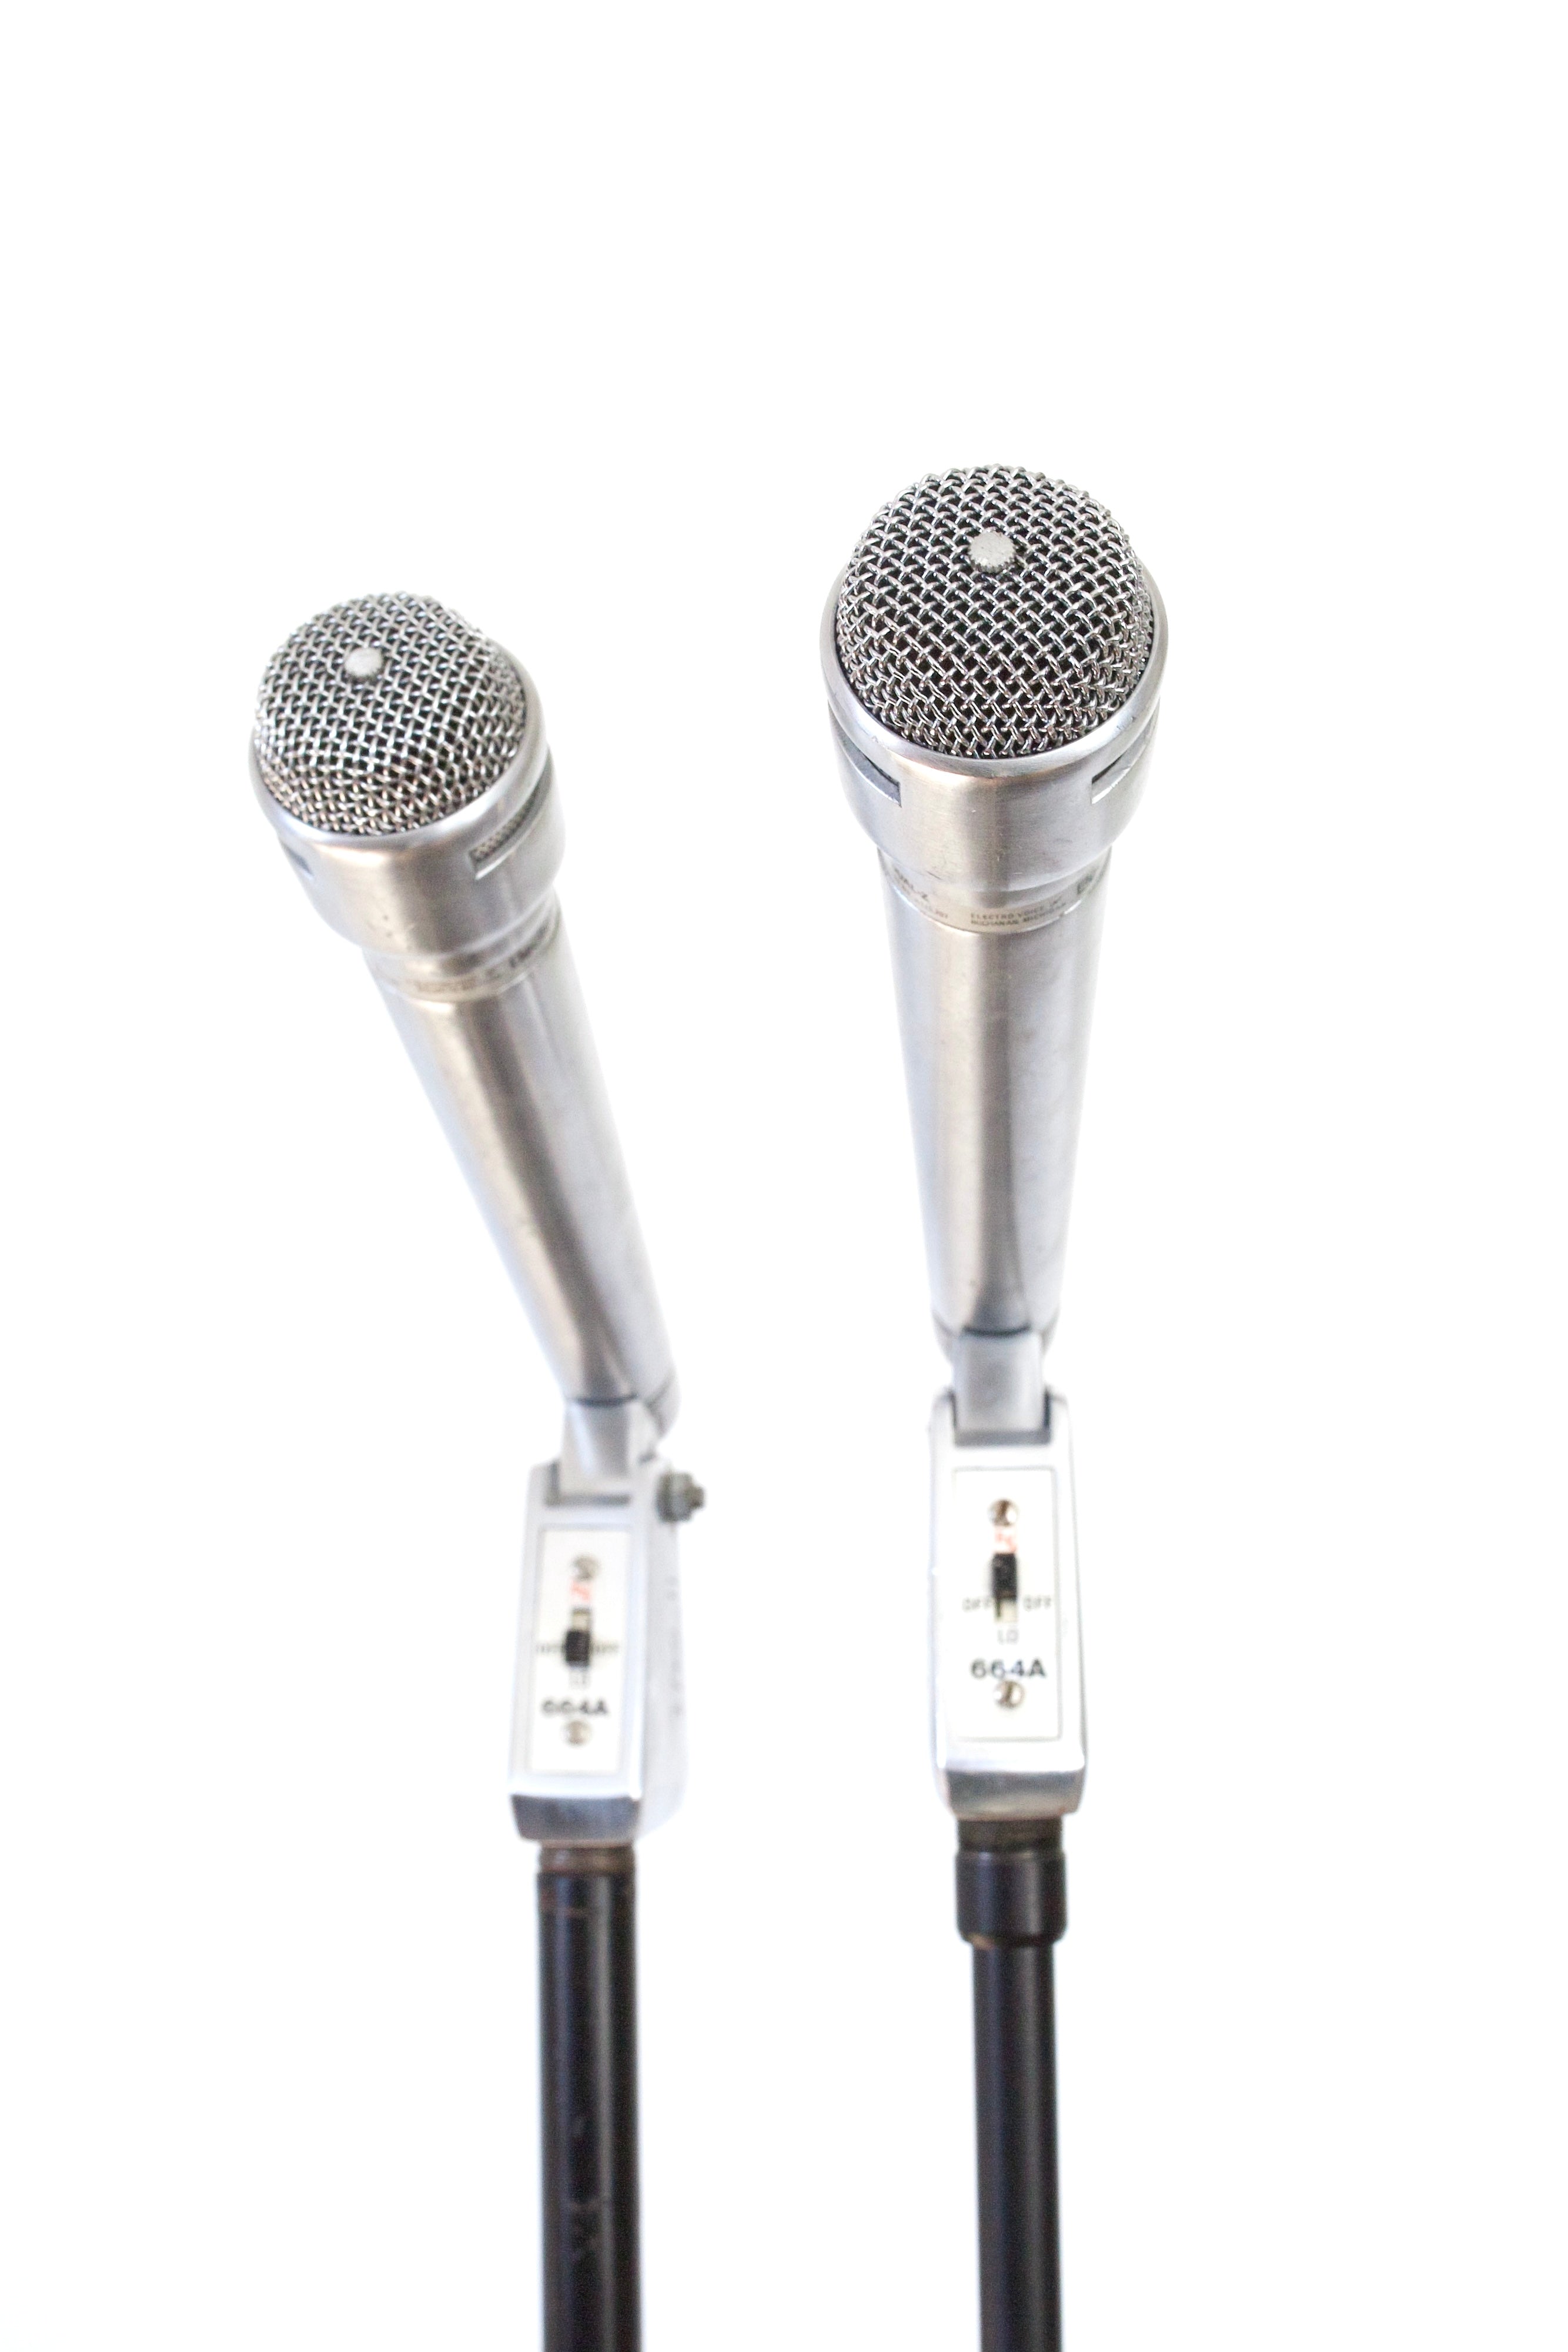 Electro Voice 664A Dynamic Microphone